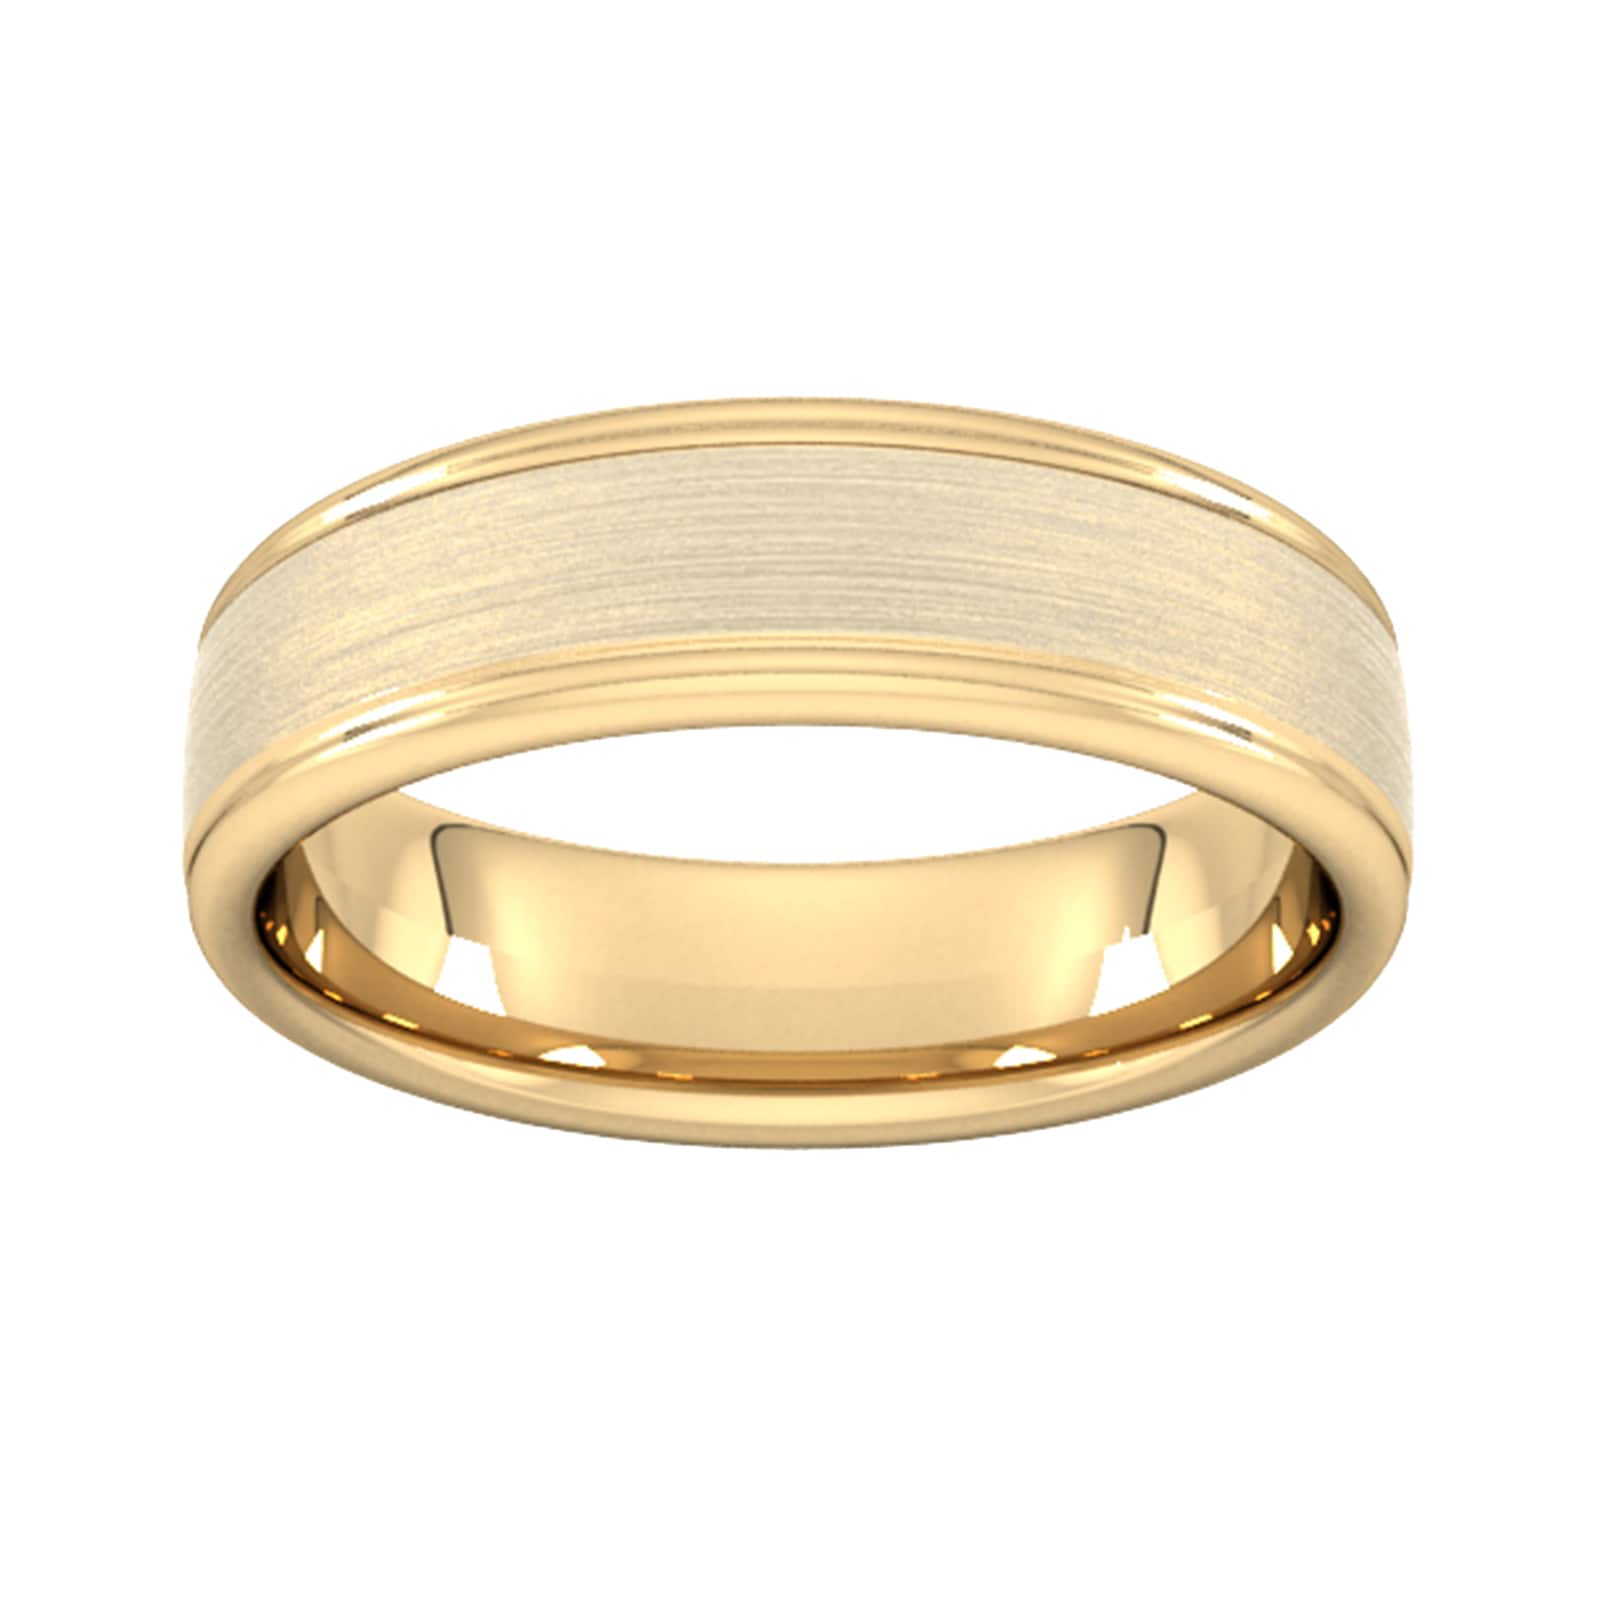 6mm Slight Court Heavy Matt Centre With Grooves Wedding Ring In 9 Carat Yellow Gold - Ring Size S